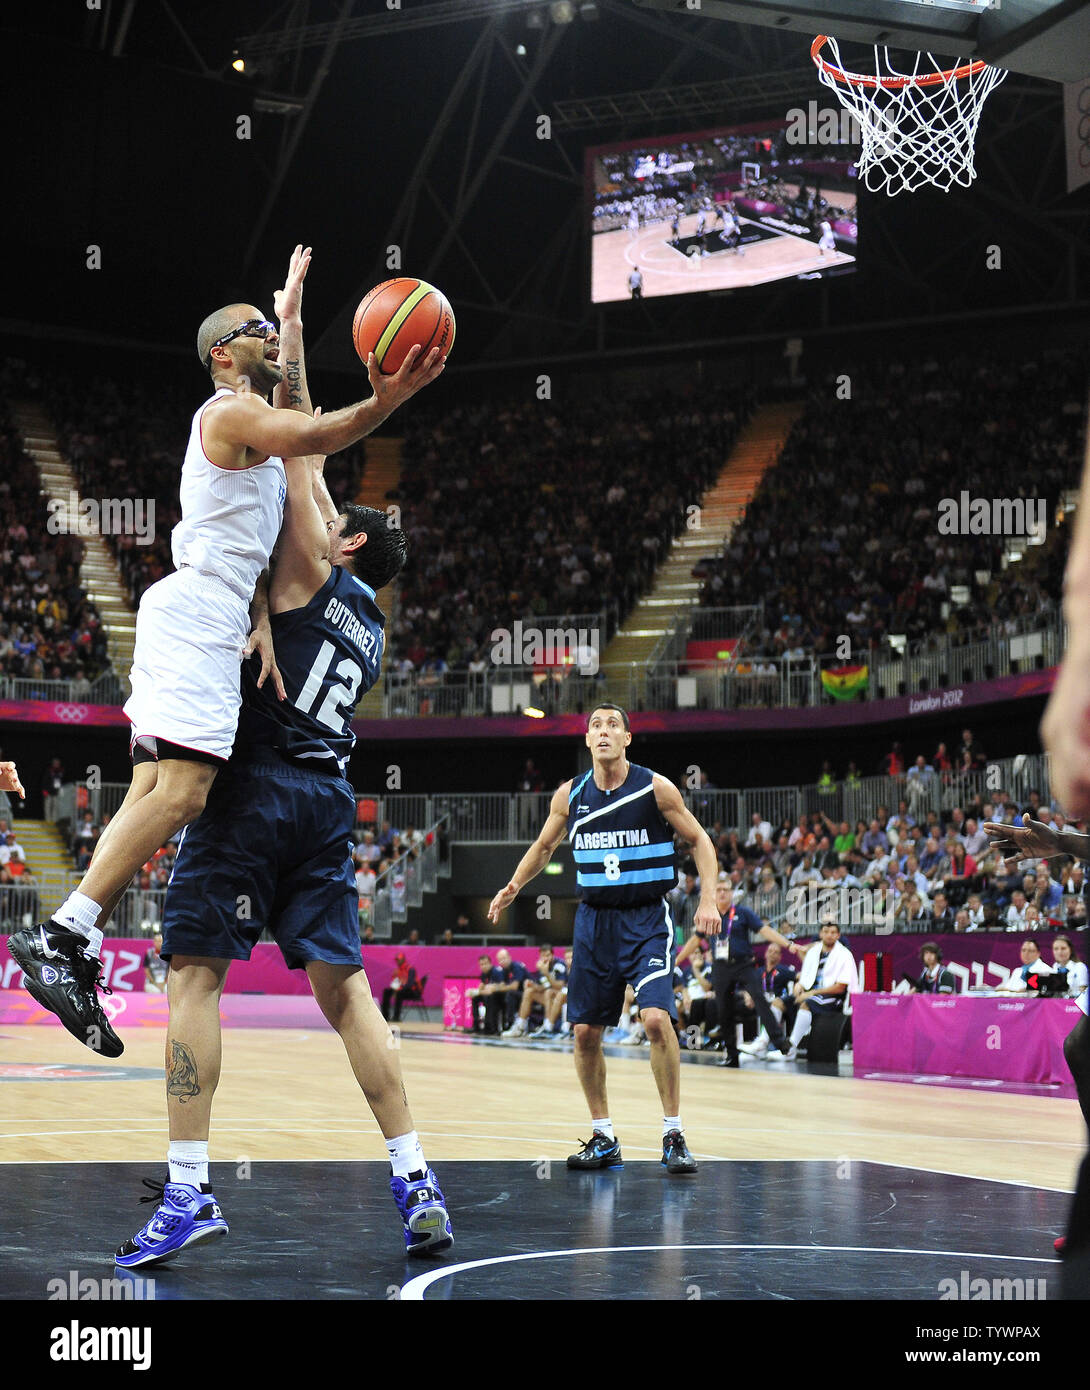 Tony Parker (9) of France drives to the basket over Leonardo Gutierrez (12) of Argentina in a preliminary round - group A basketball game at the London 2012 Summer Olympics on July 31, 2012 in London.  France won the game 71 - 64.  UPI/Ron Sachs Stock Photo